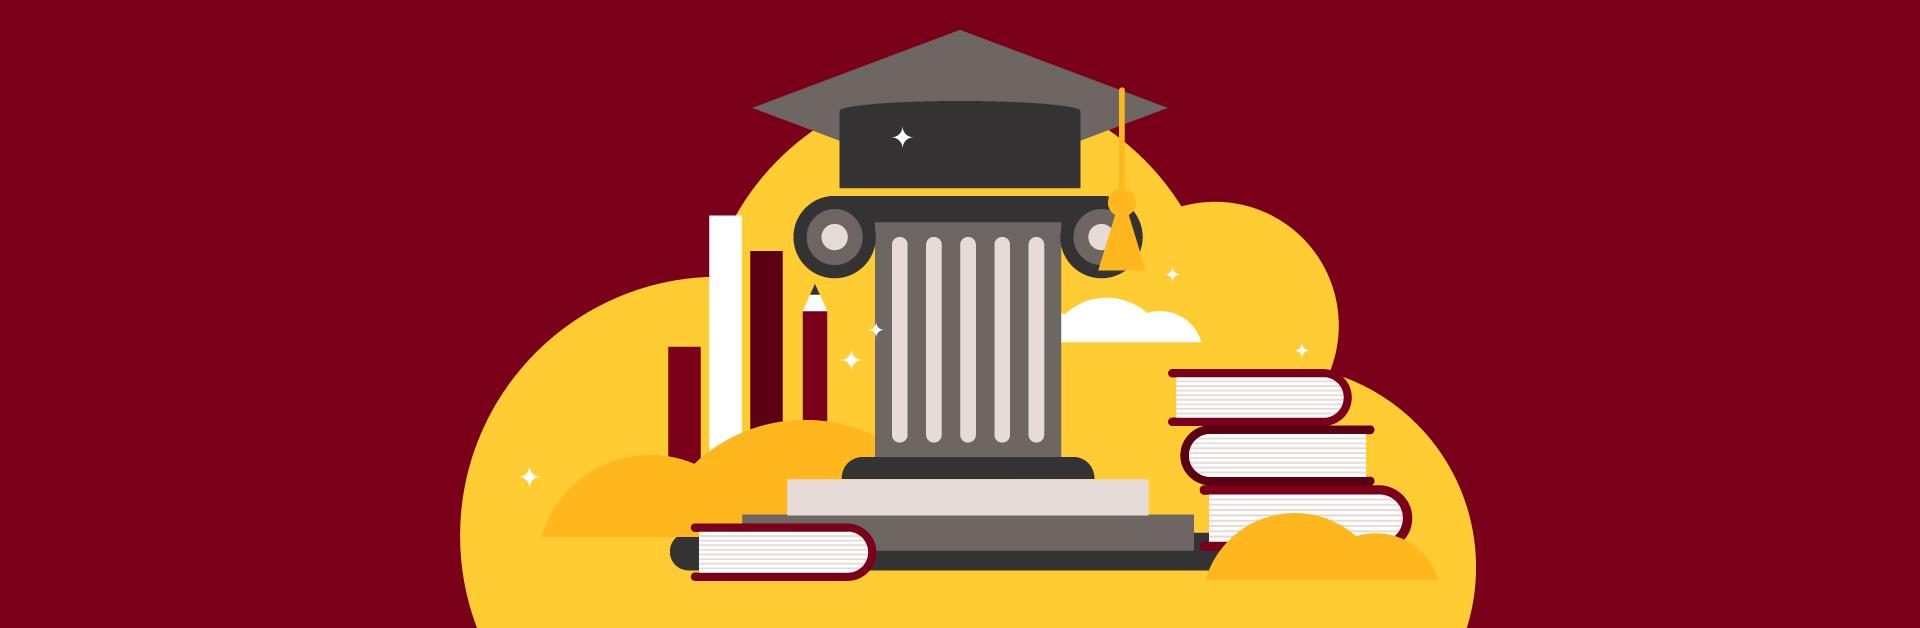 Graduation cap on column surrounded by books and bar chart graphic illustration.